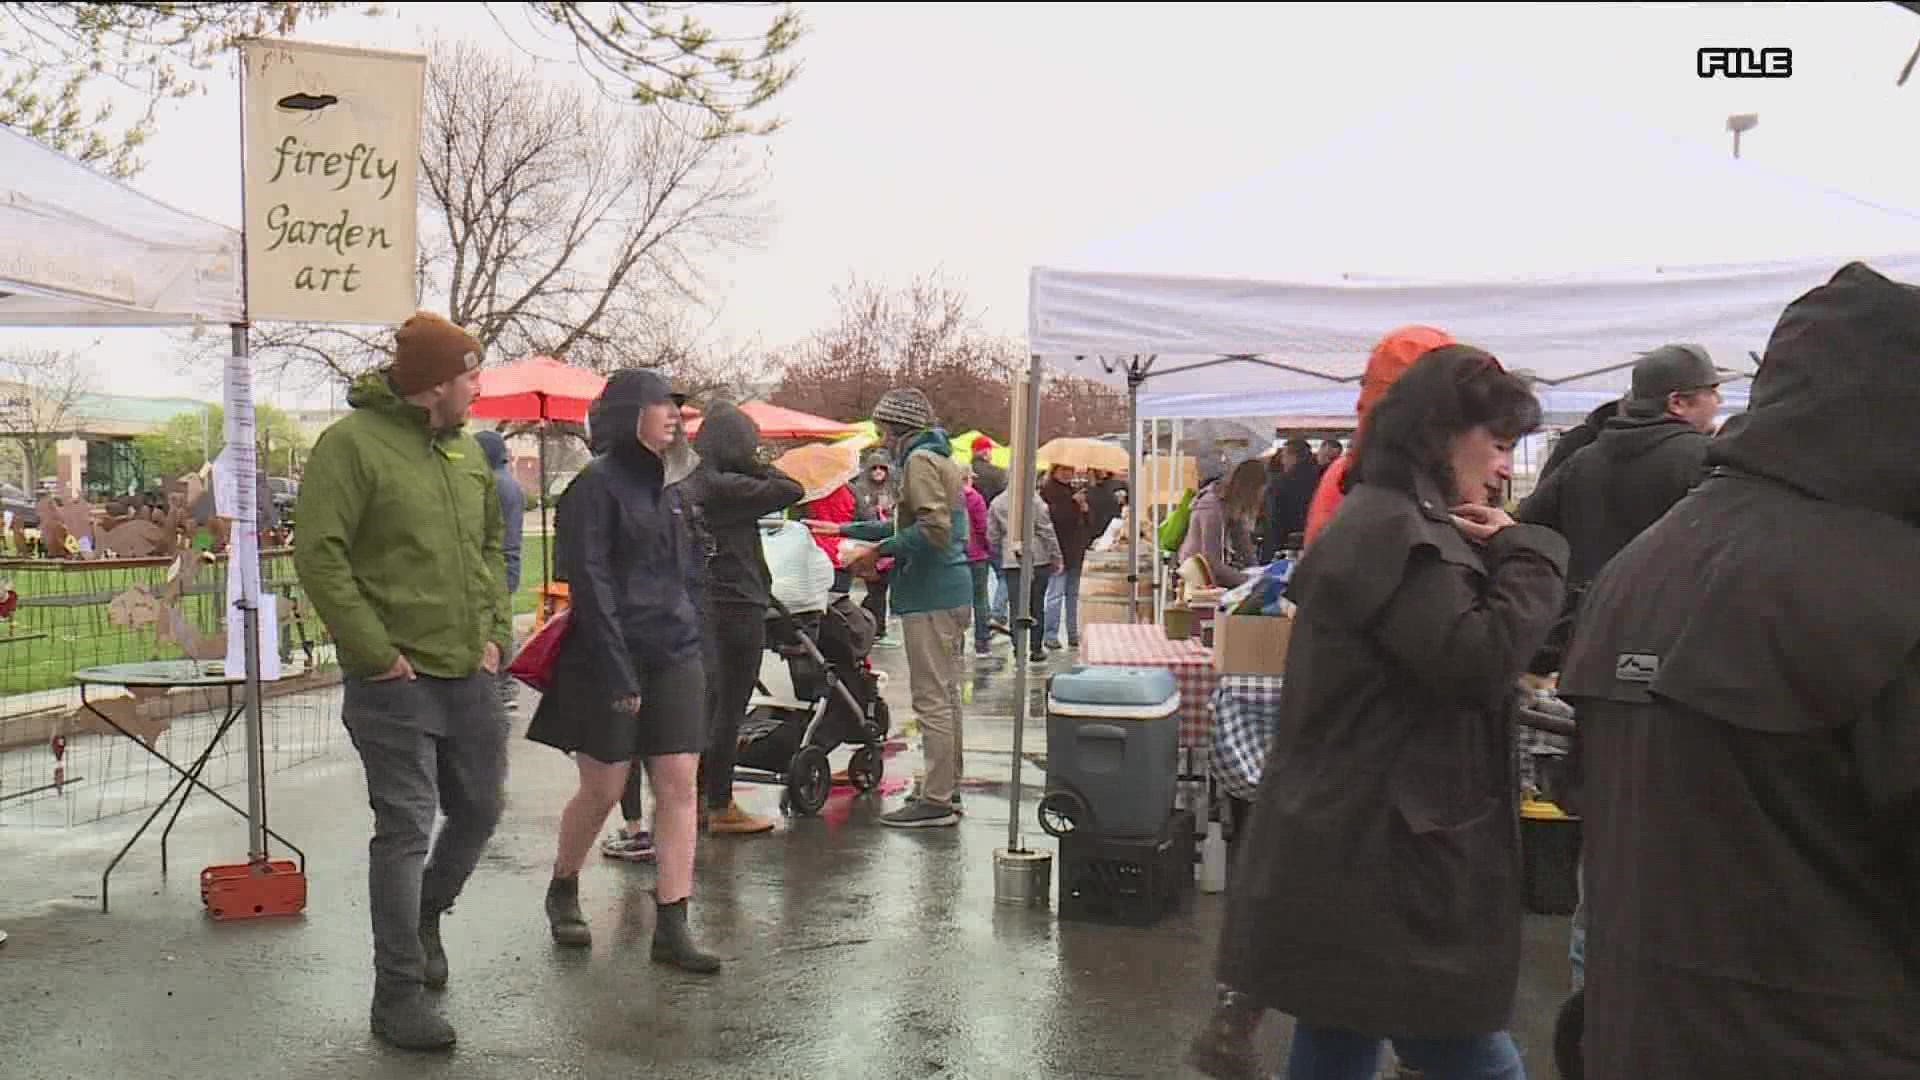 An estimated 2,000 people visit the Boise Farmers Market every weekend.